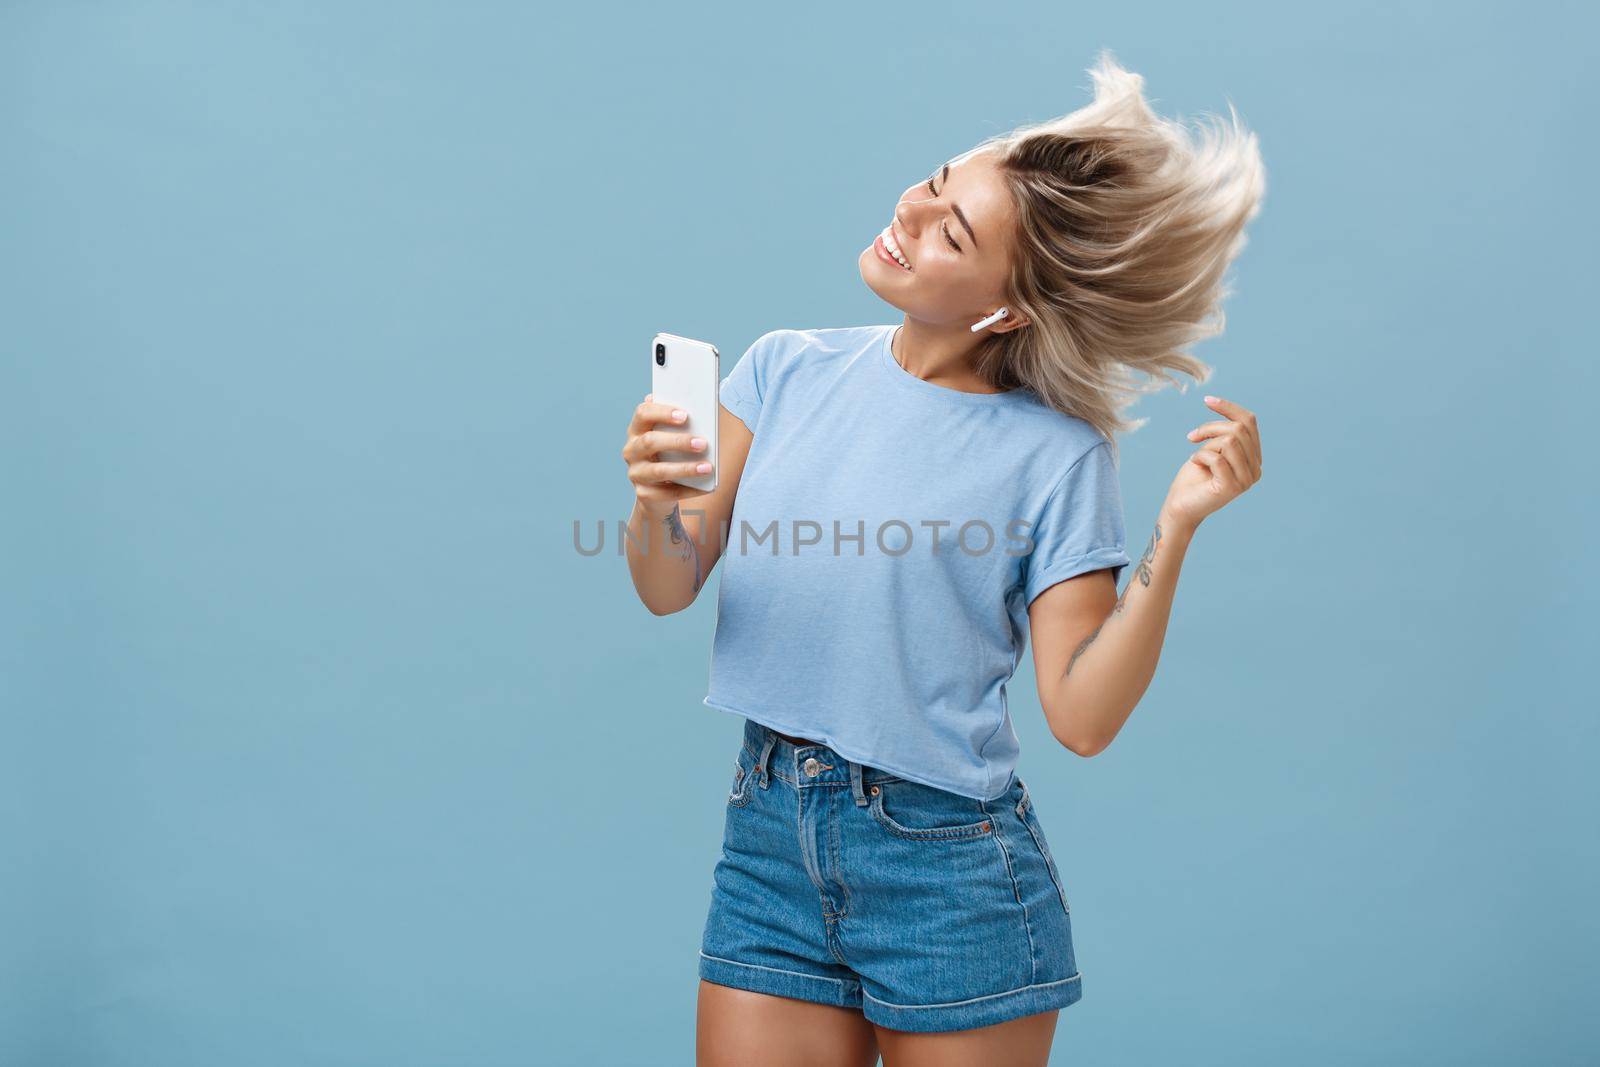 Lifestyle. Girl enjoying cool bits in brand new wireless earphones advertising earbuds in own blog recodring video via smartphone dancing from joy and delight smiling listening music over blue background.